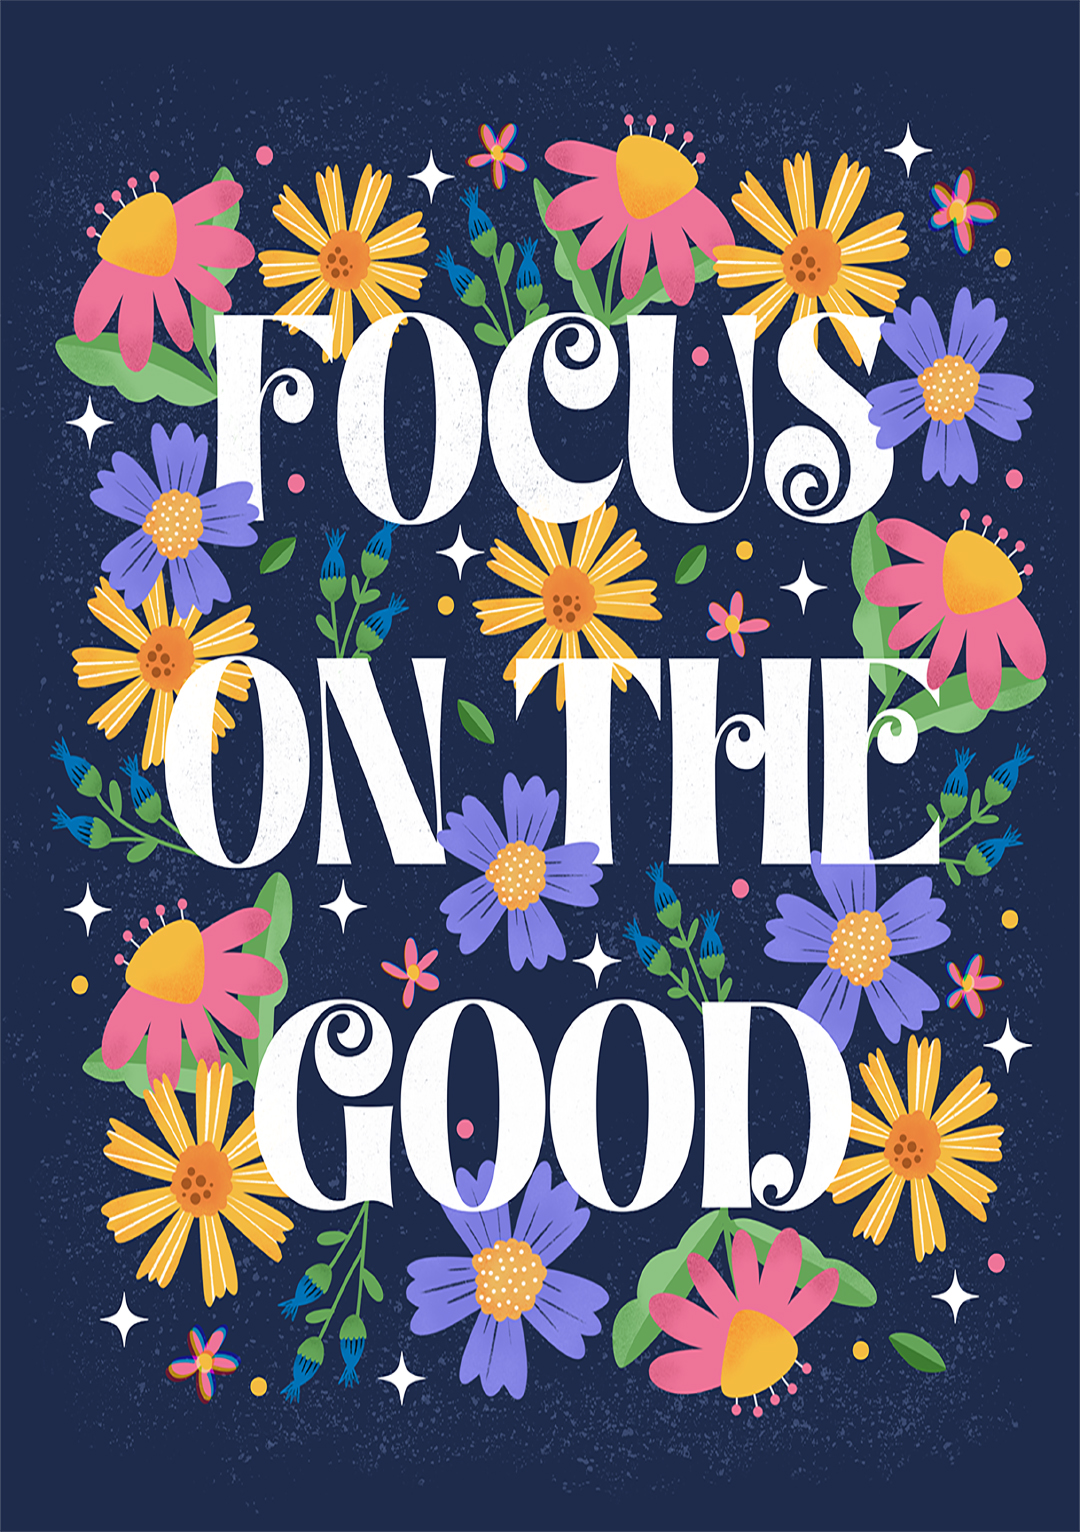 Focus On The Good - Inspirational Greeting Card